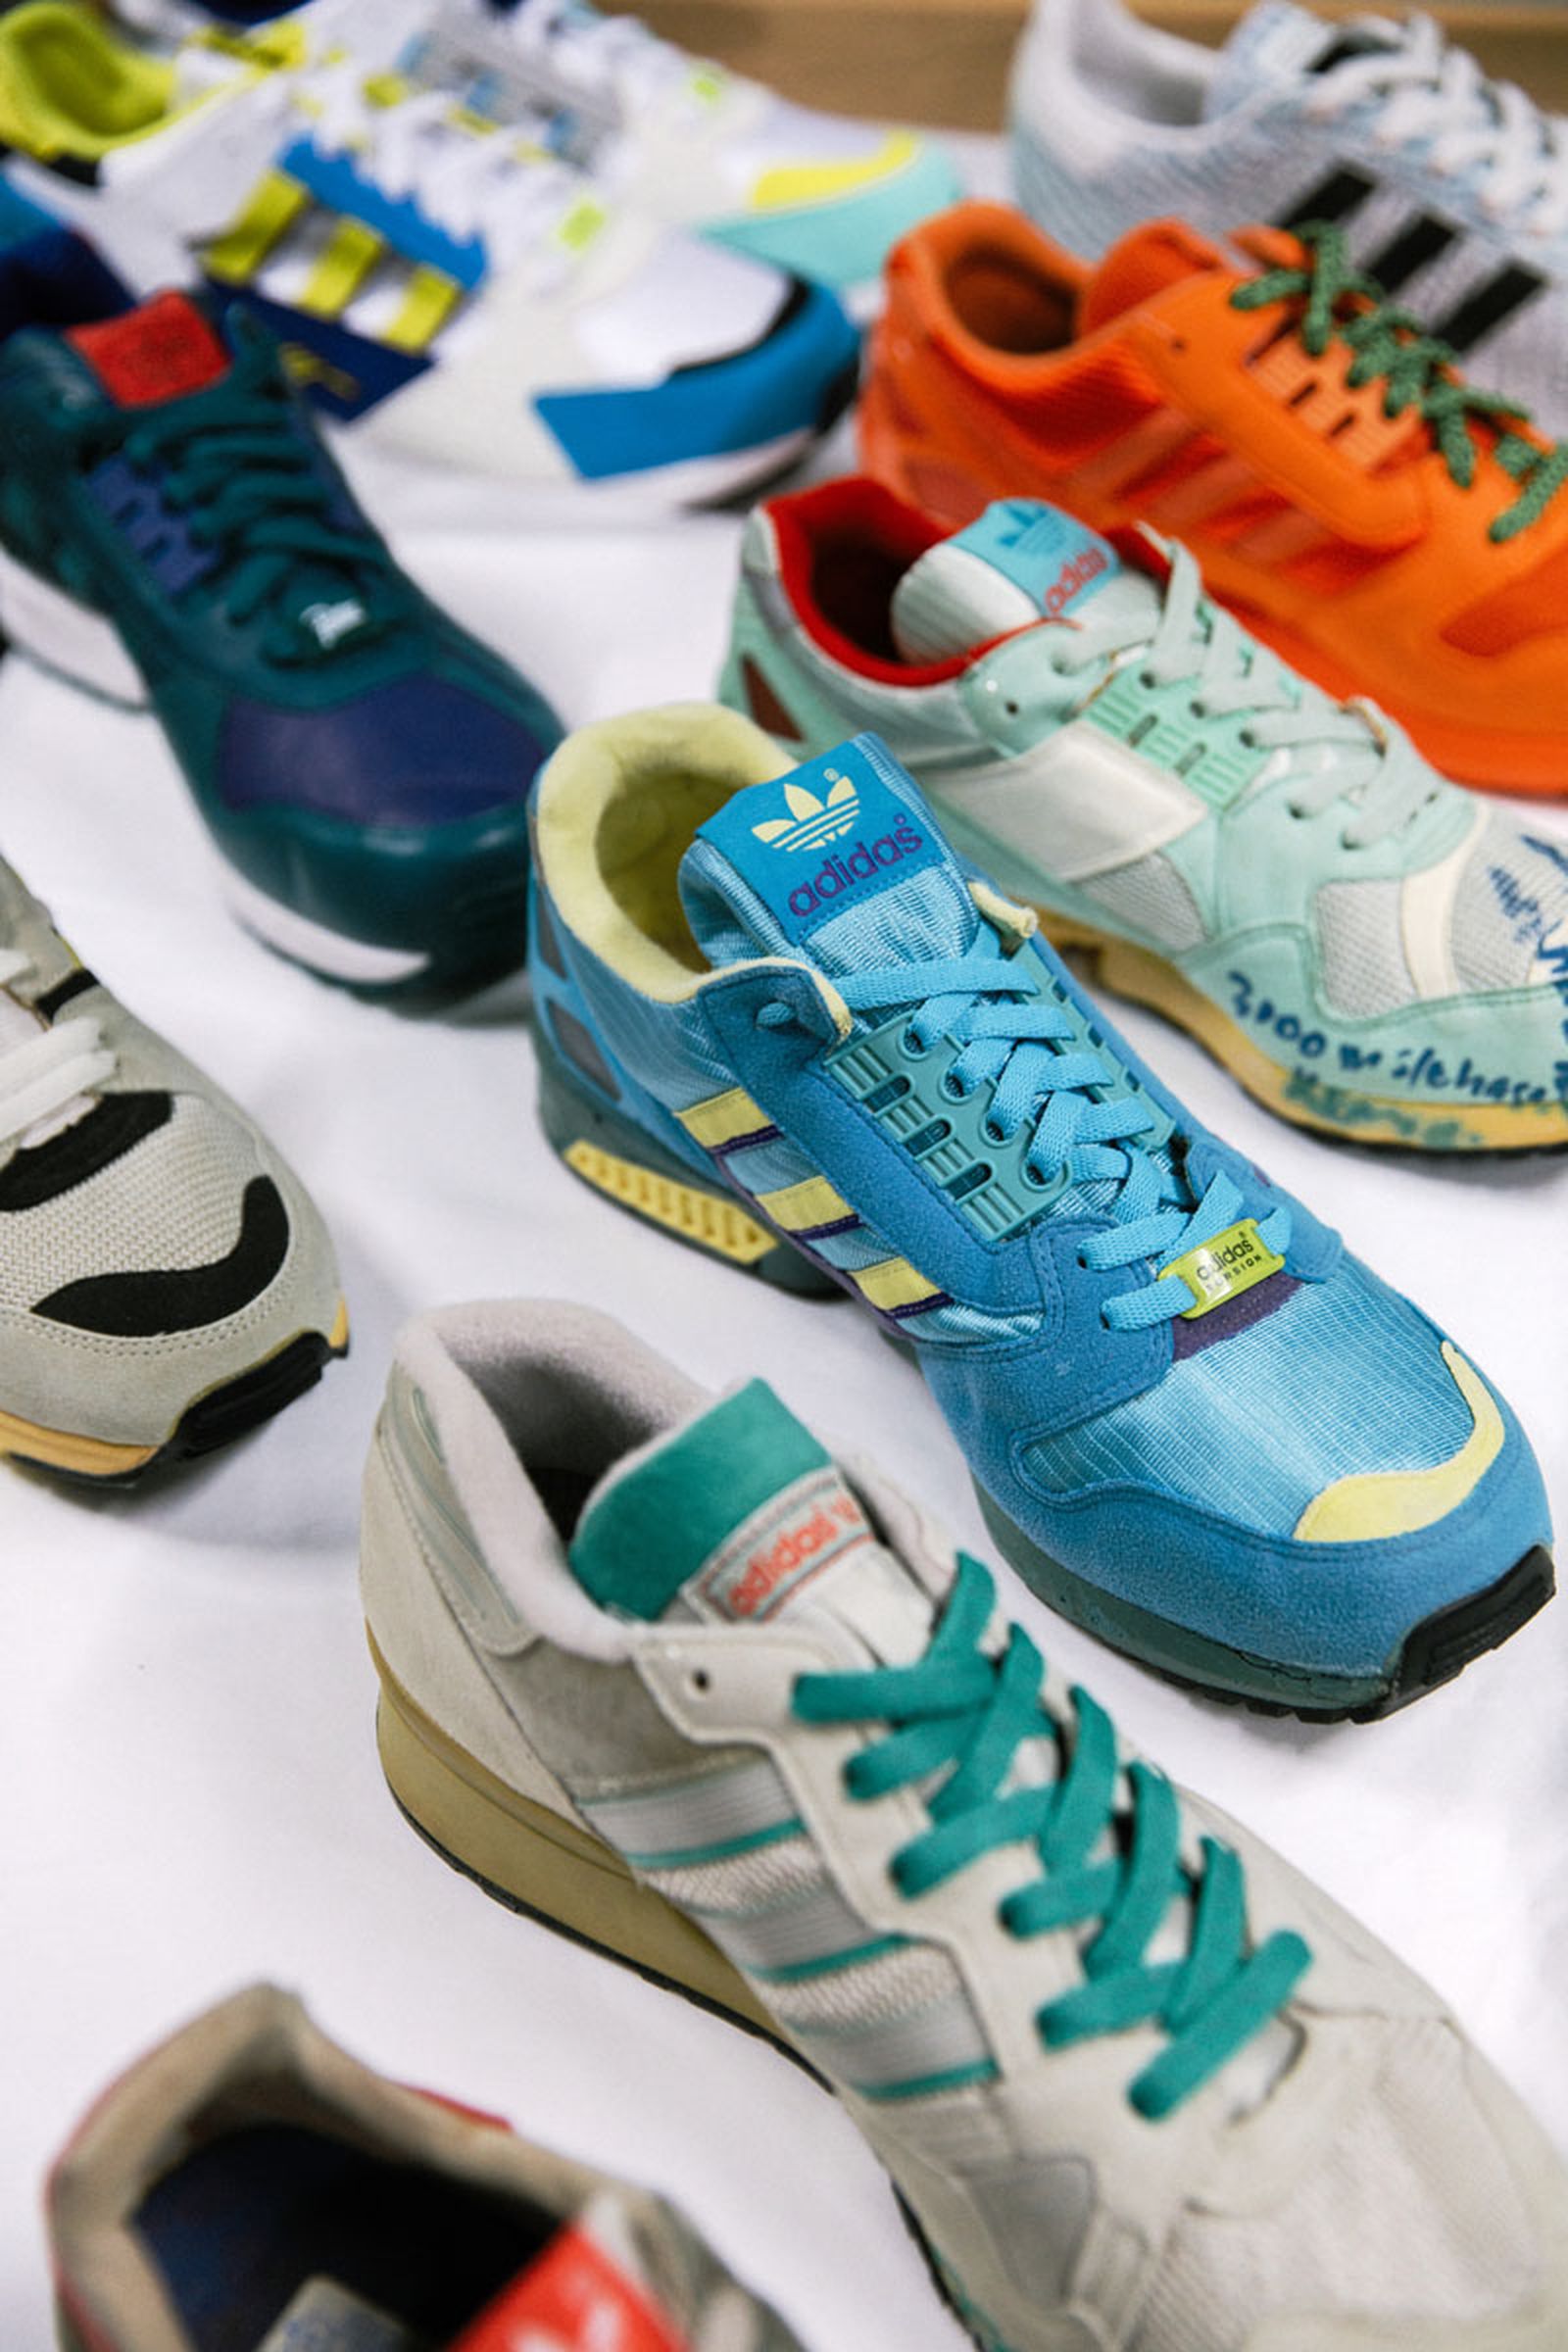 Scholarship Dialogue Endless A Brief History of the adidas ZX: Innovation, Collabs & Raves